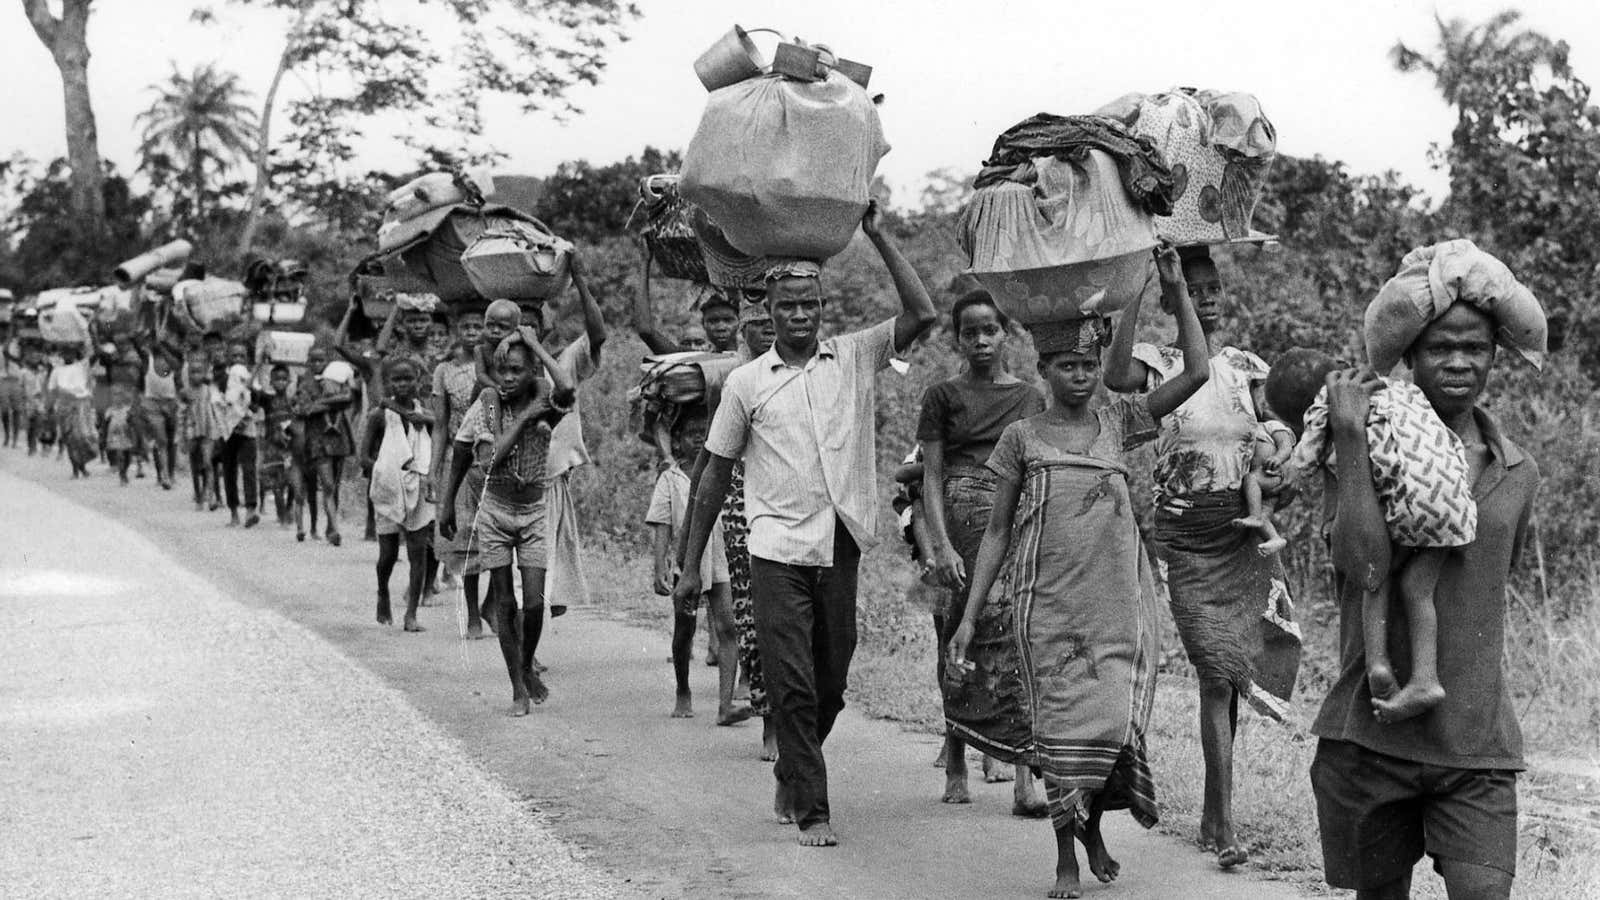 Locals in south east Nigeria in 1968 during the peak of the Biafra war.